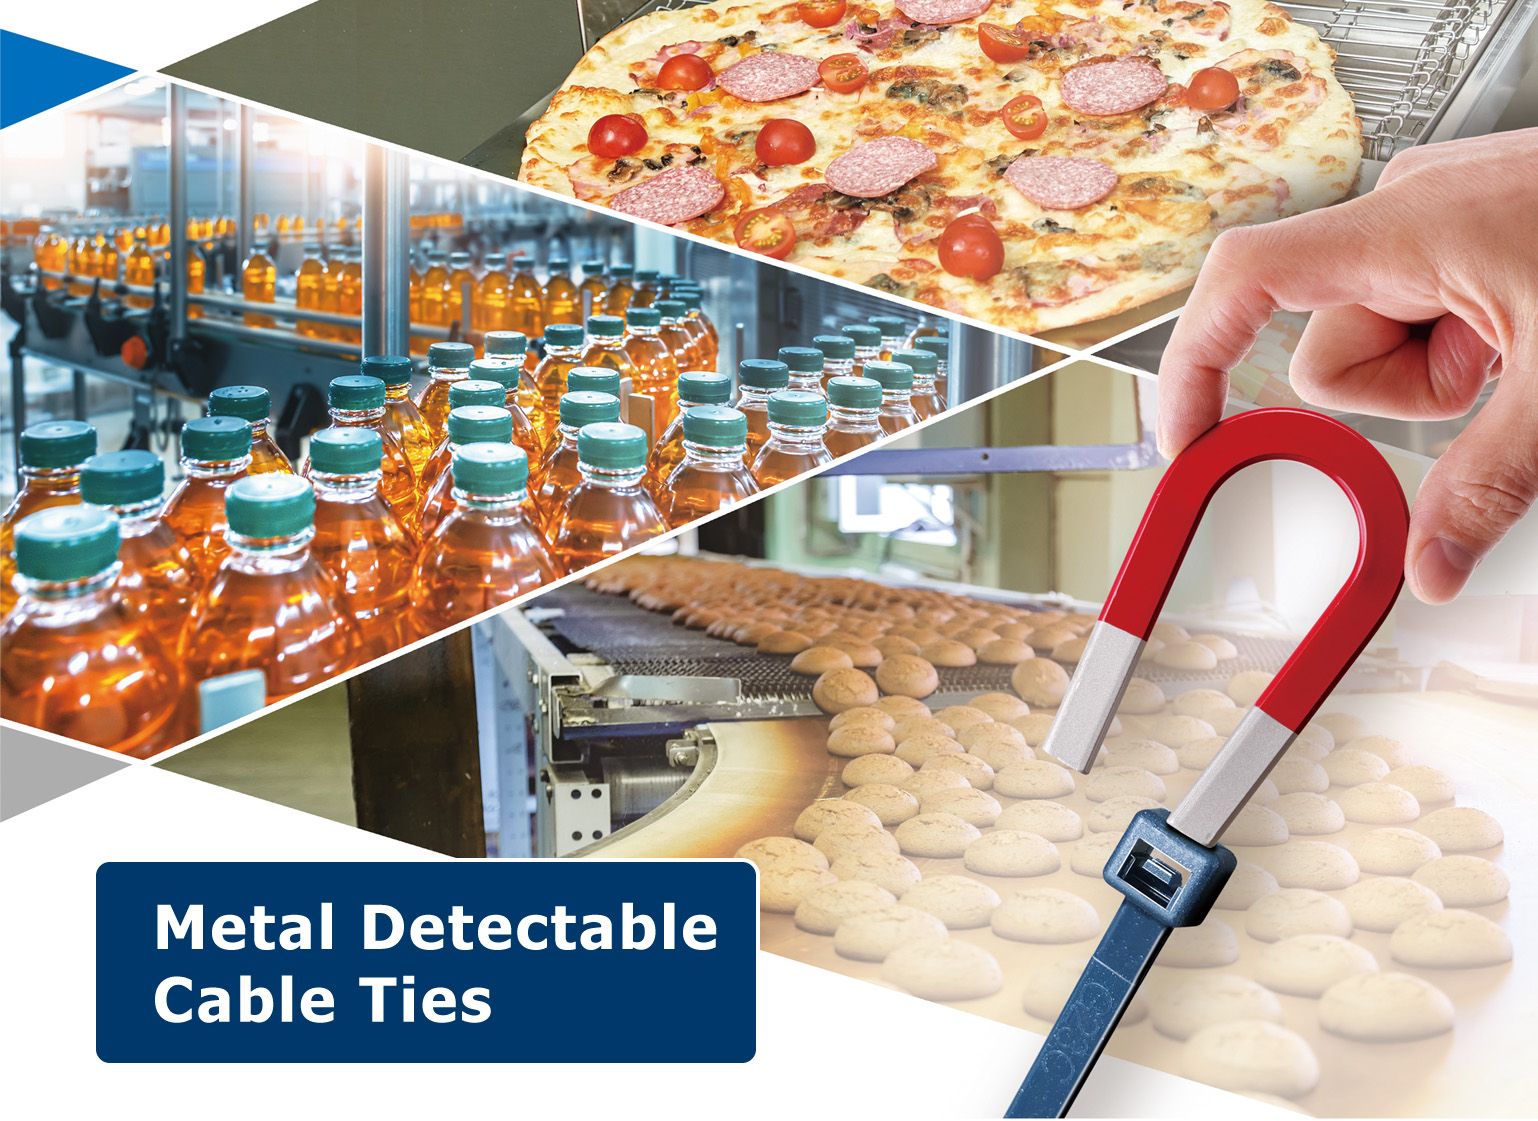 Metal Detectable Cable Tie is ideal for food, beverage, pharmaceutical and cosmetics industries 